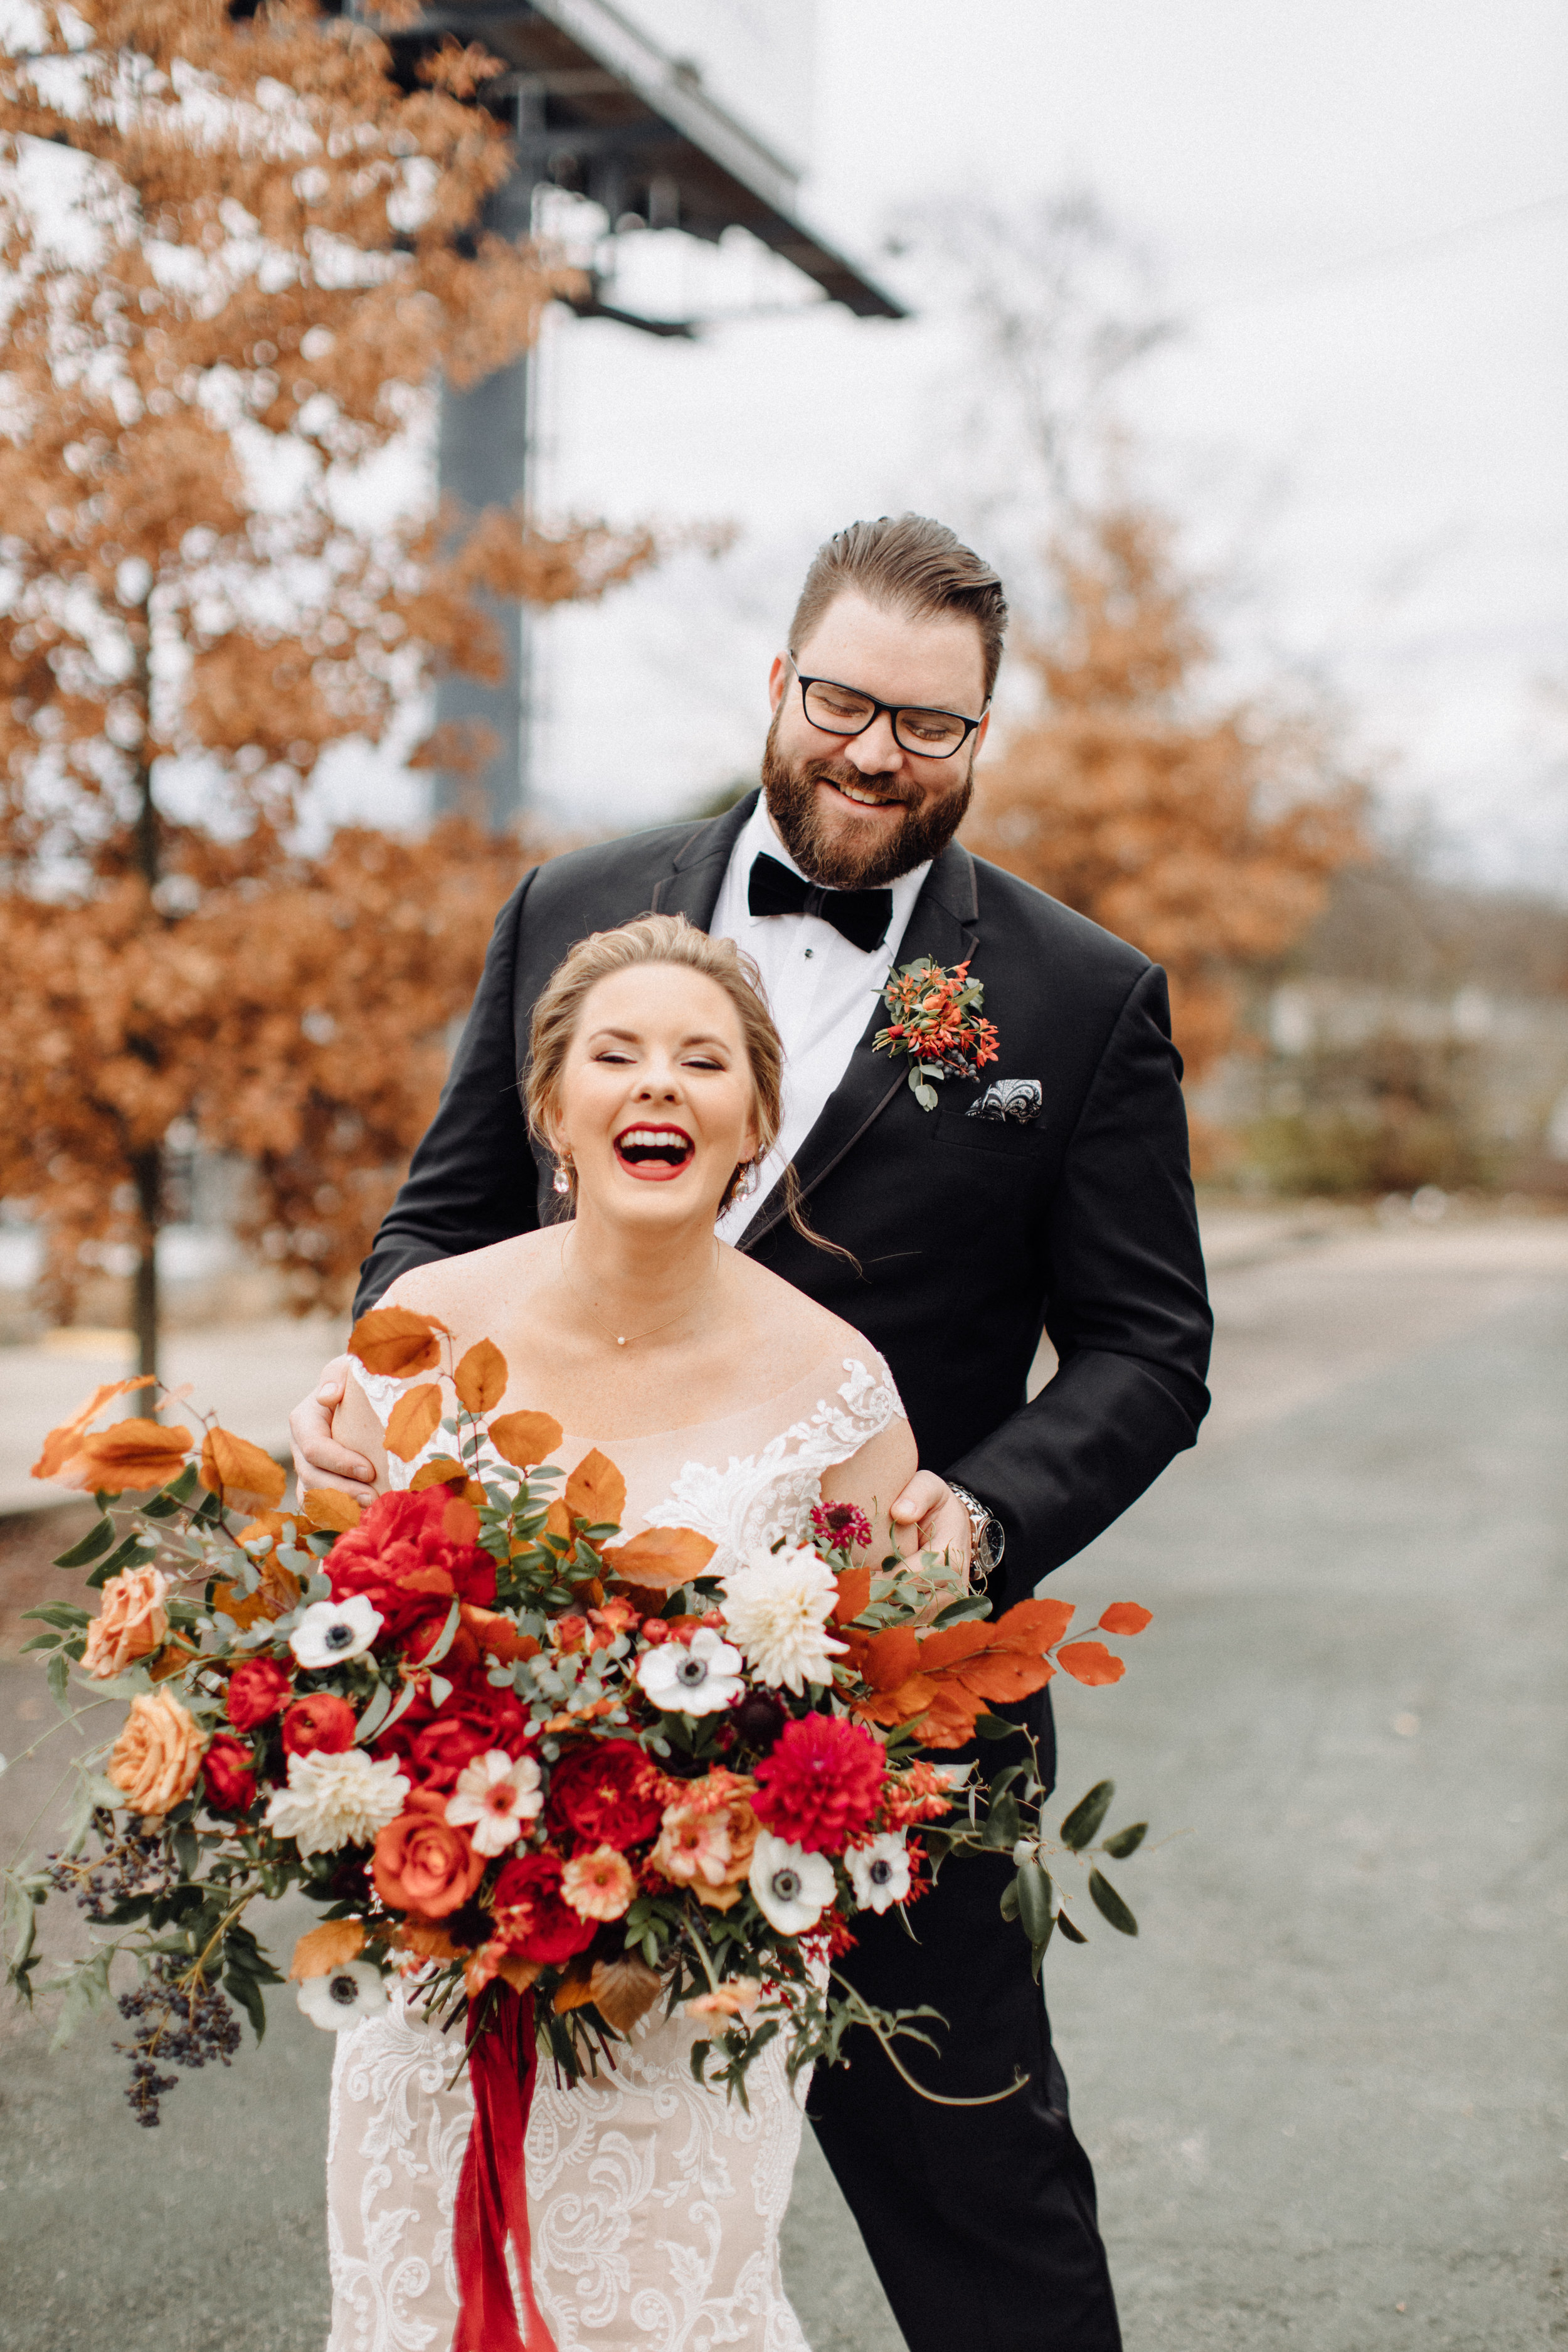 Asymmetrical, airy bridal bouquet with burgundy, burnt orange, and gold hues, using anemones, dahlias, and garden roses. Nashville, TN wedding florist.